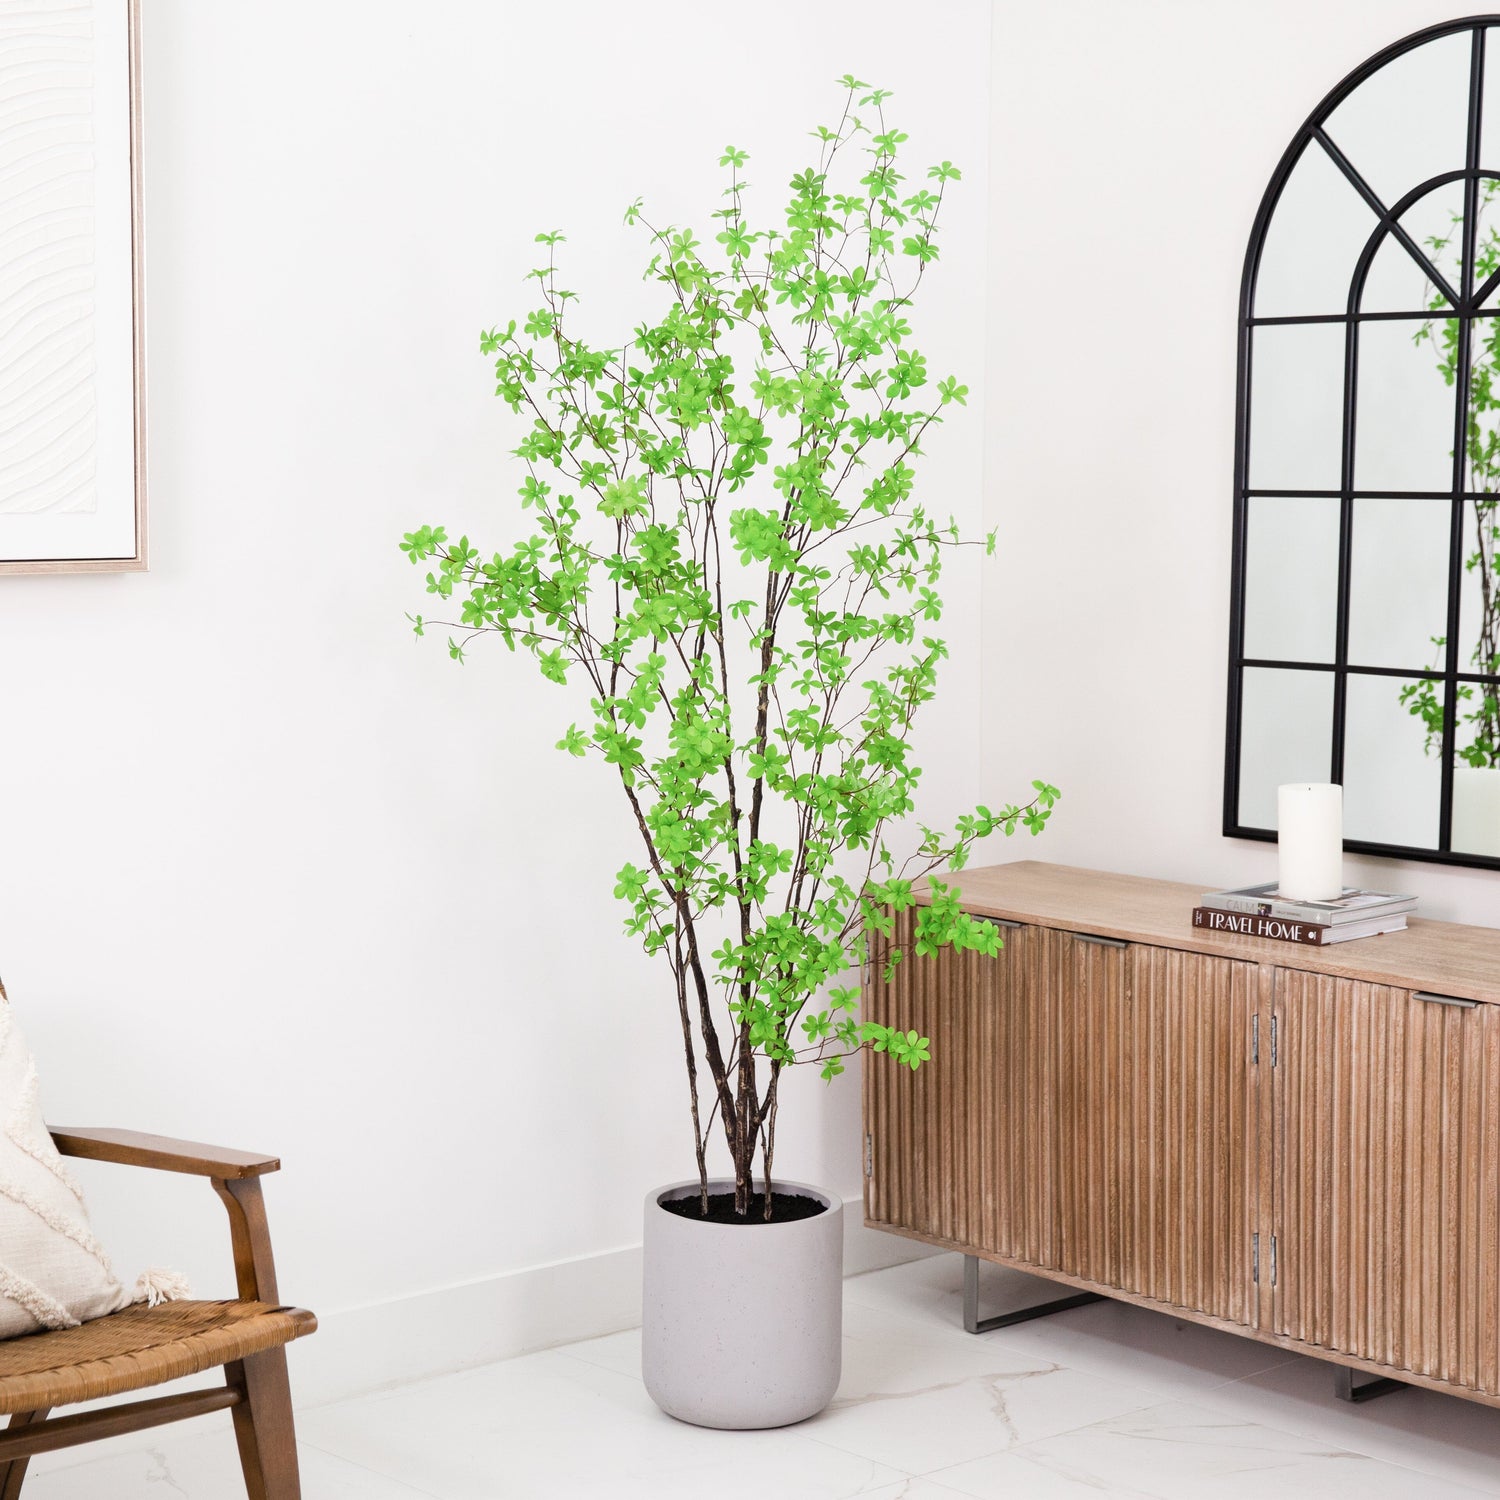 7’ Artificial Enkianthus Tree with Resin Stone Planter